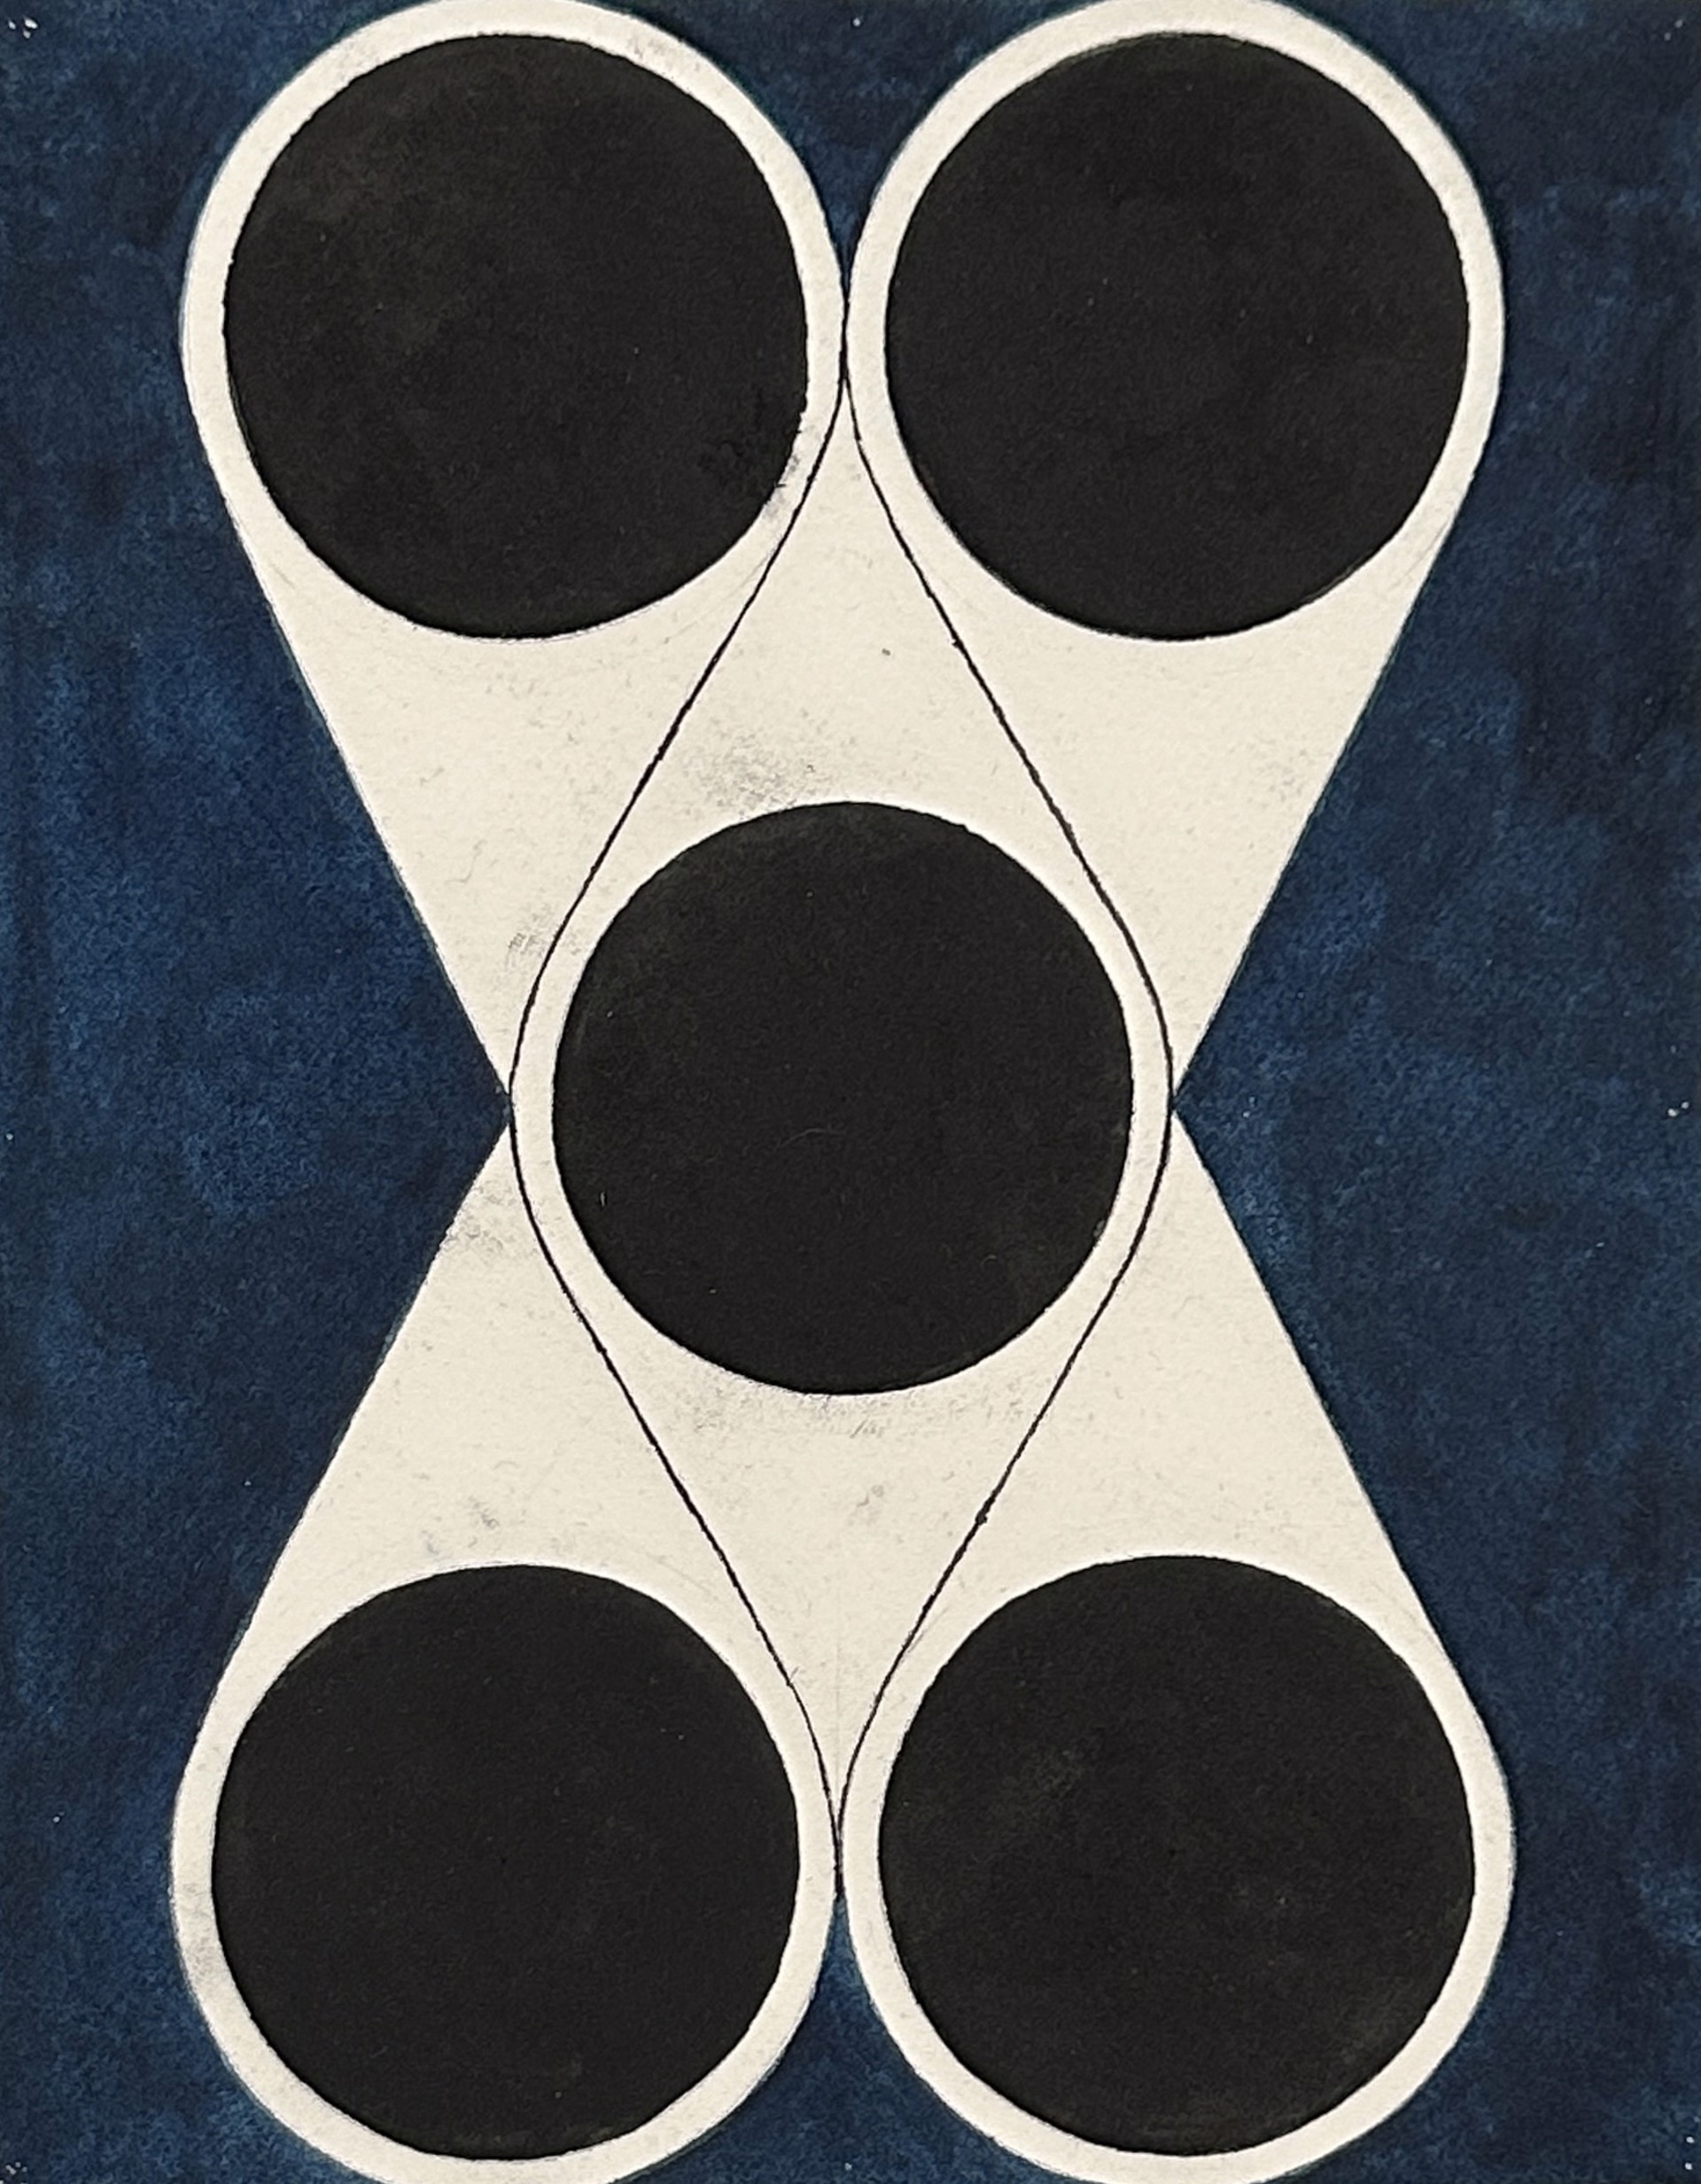 Untitled (navy with clusters) by Matt Messinger - Works on Paper